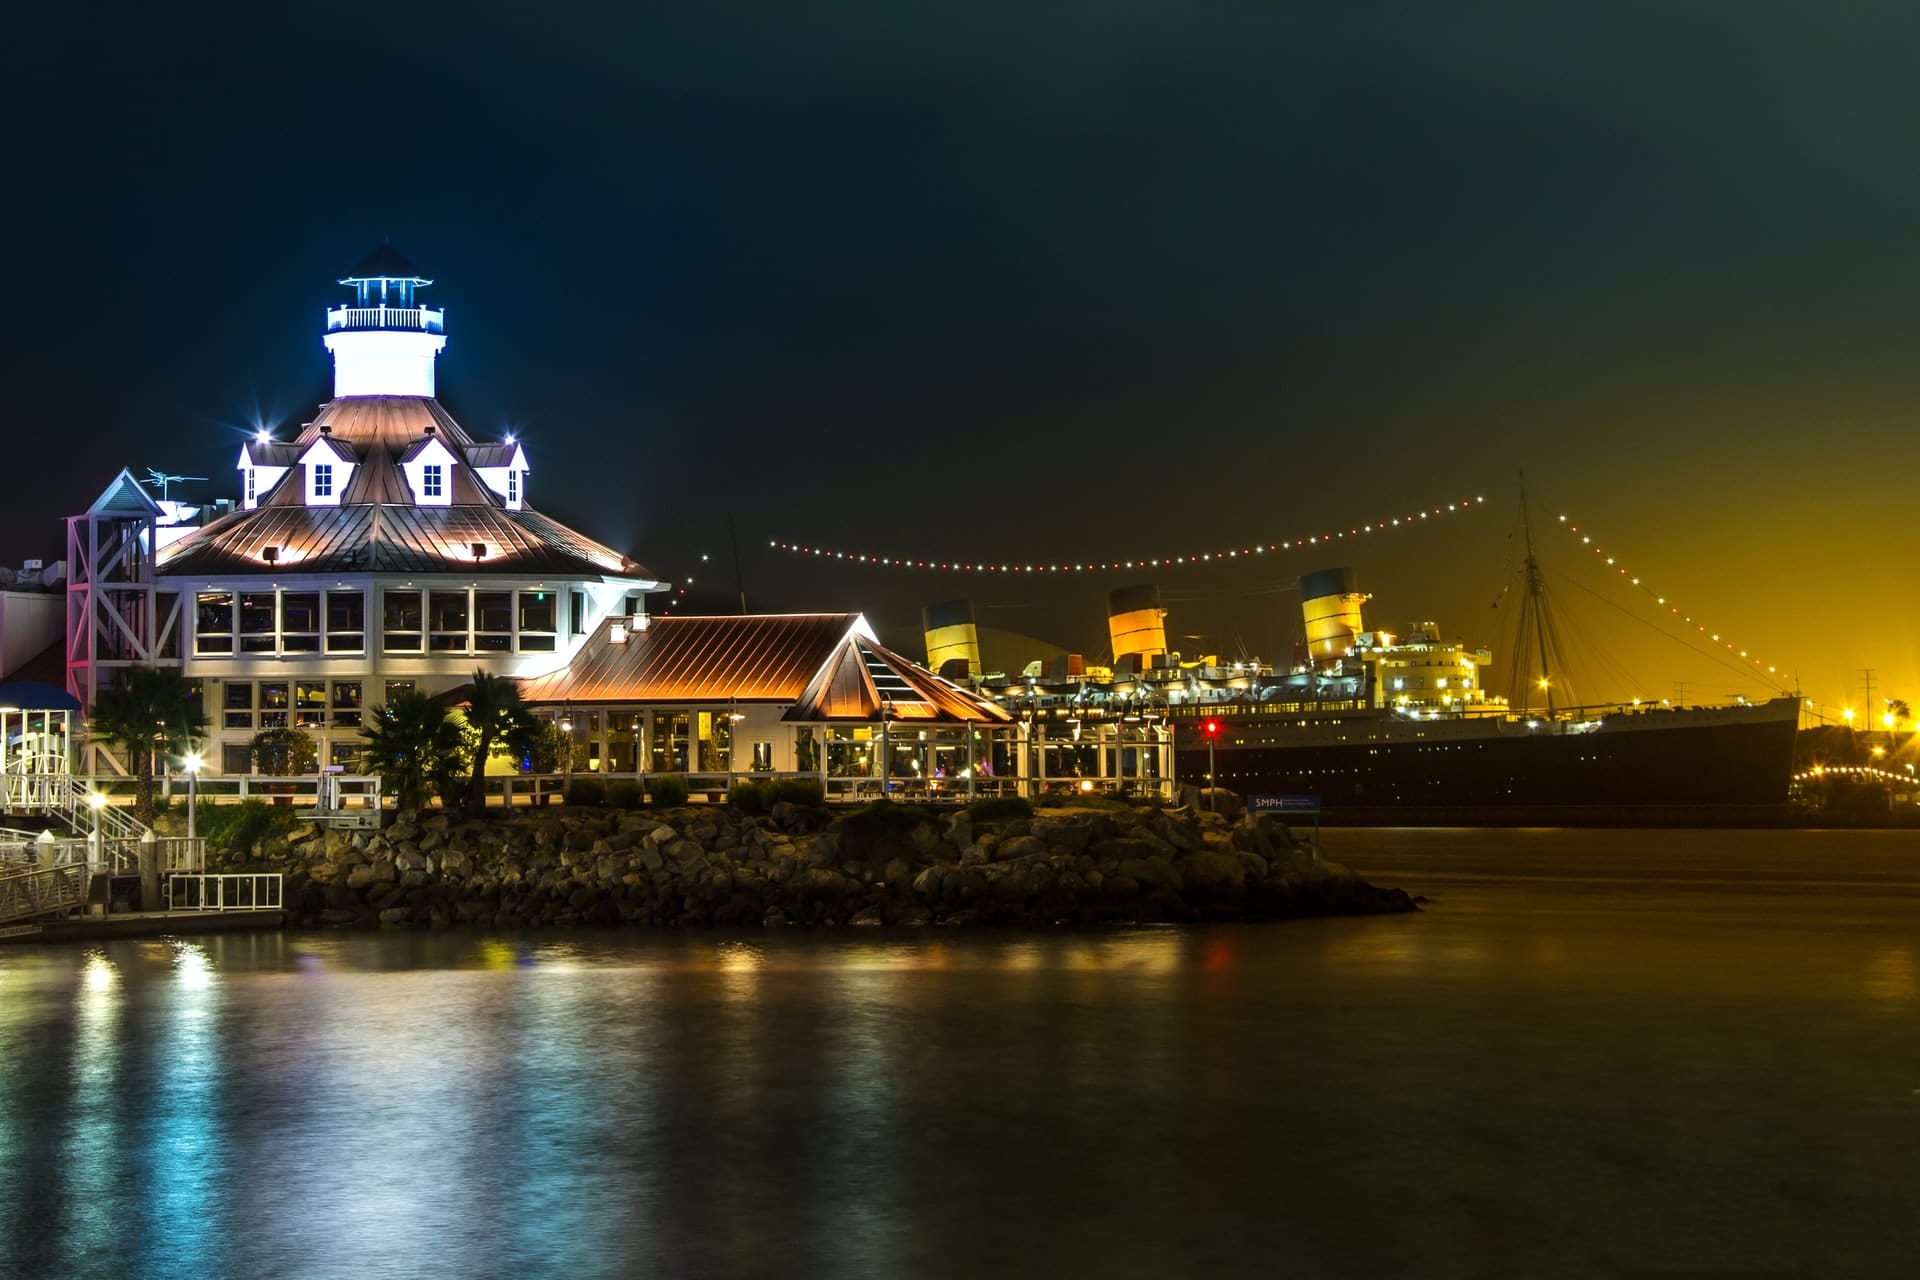 The Queen Mary Hotel at night, Long Beach, California, USA. A beautiful floating hotel close to Rosie's Dog Beach.